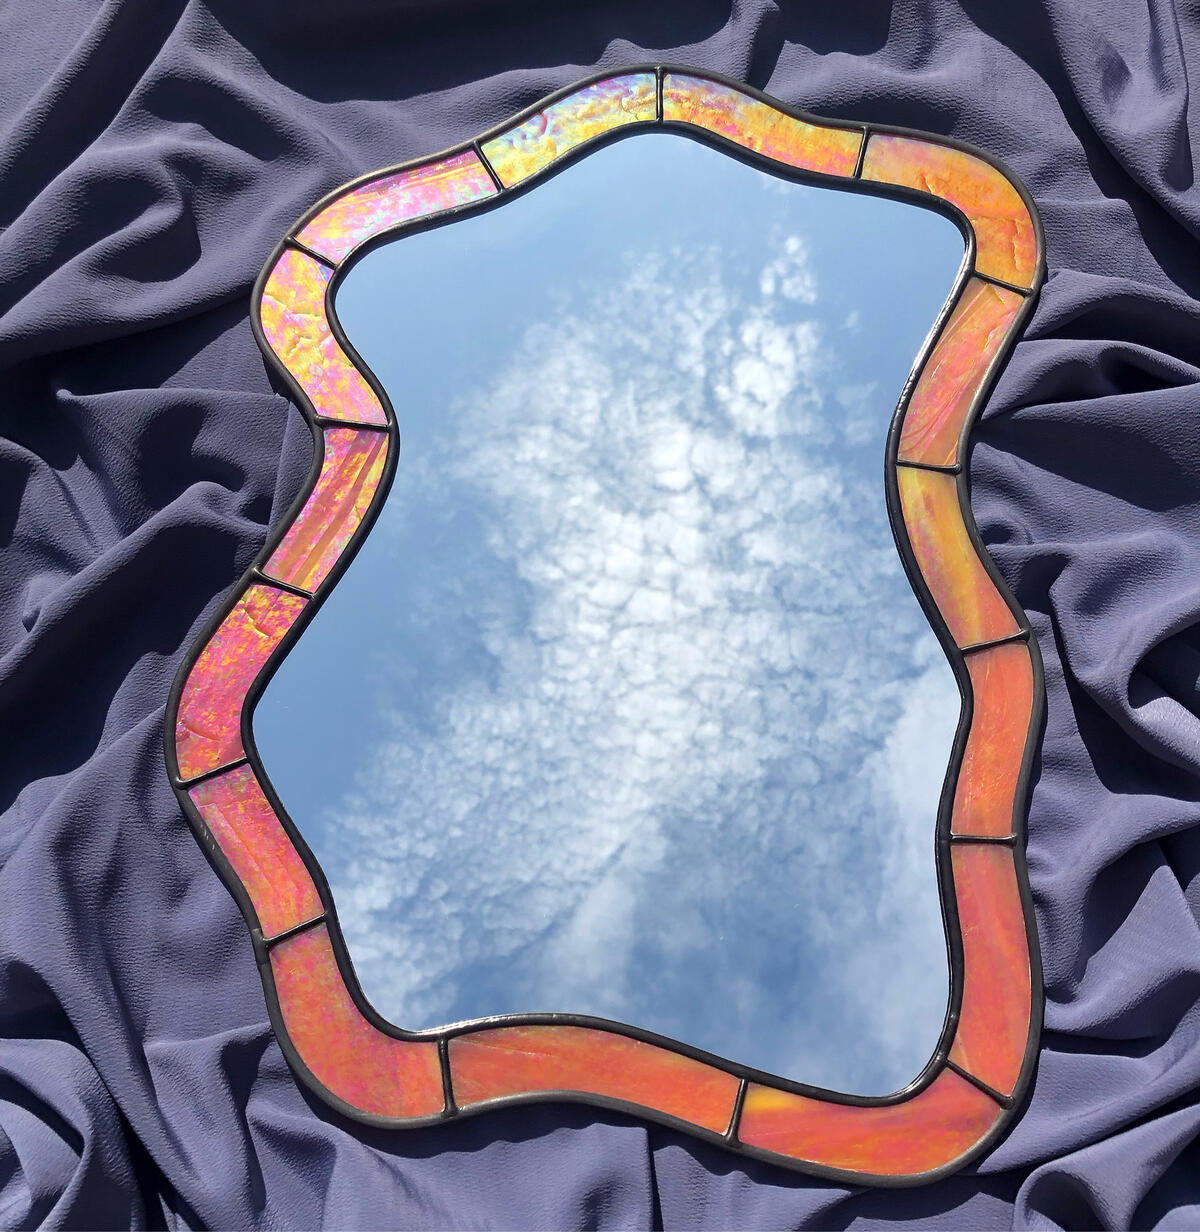 This L.A. glass artist is making some seriously psychedelic mirrors